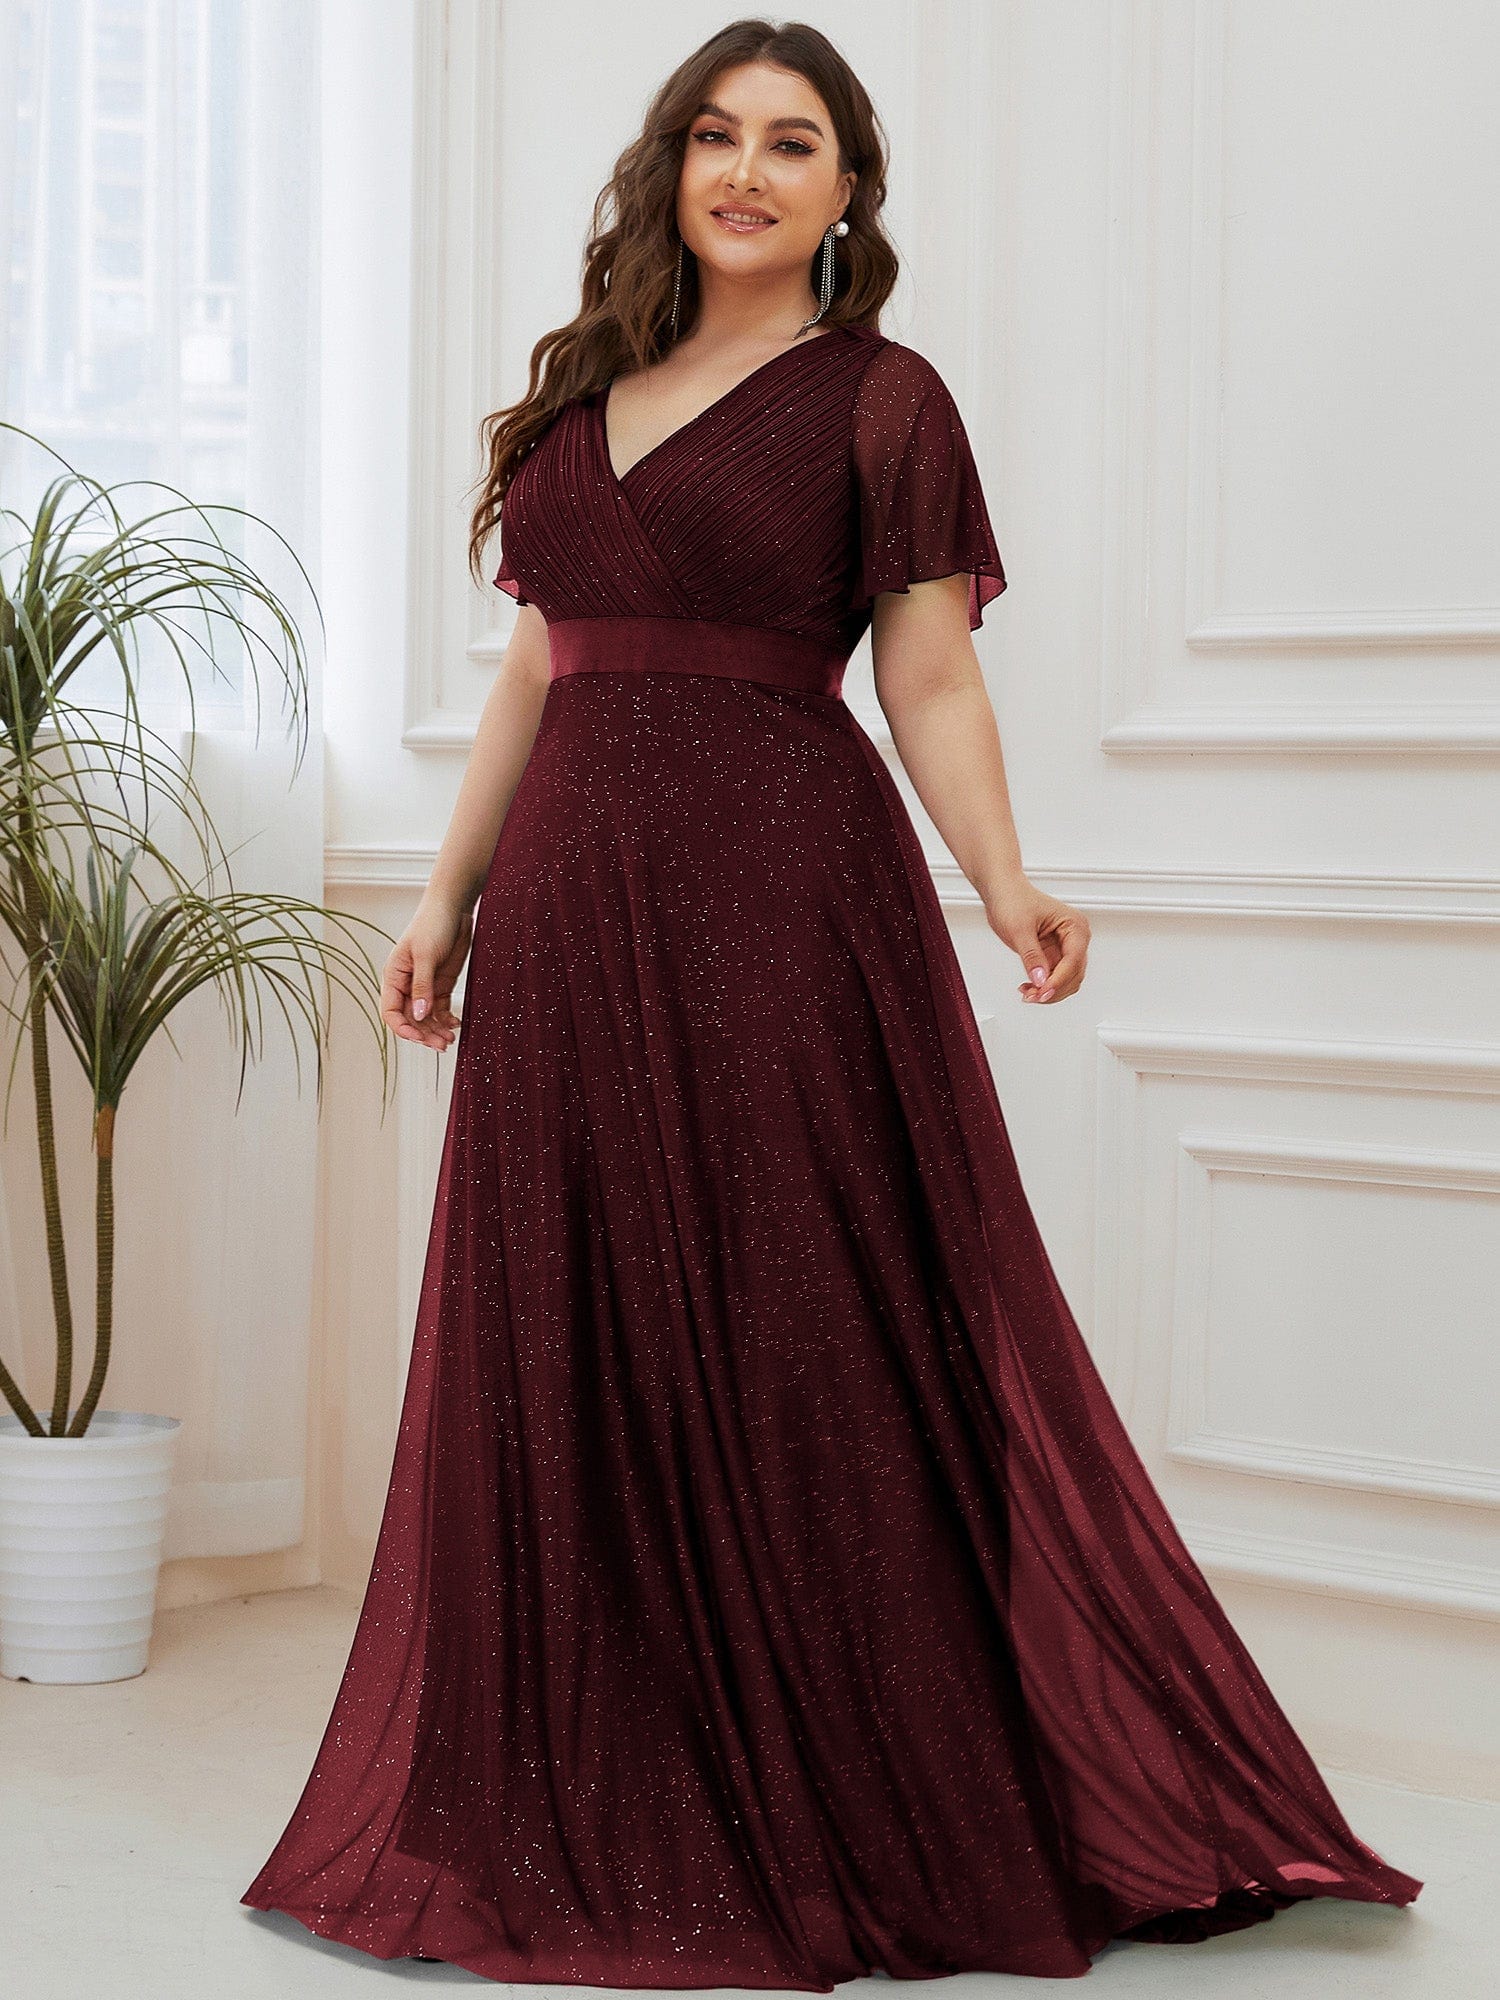  Plus Size Dresses for Curvy Women Formal Party Sexy Fall  Wedding Dresses for Women 2024 Party Long Sleeve Evening Bodycon Club Dress  Women's Club & Night Out Bridesmaid Dresses Black 